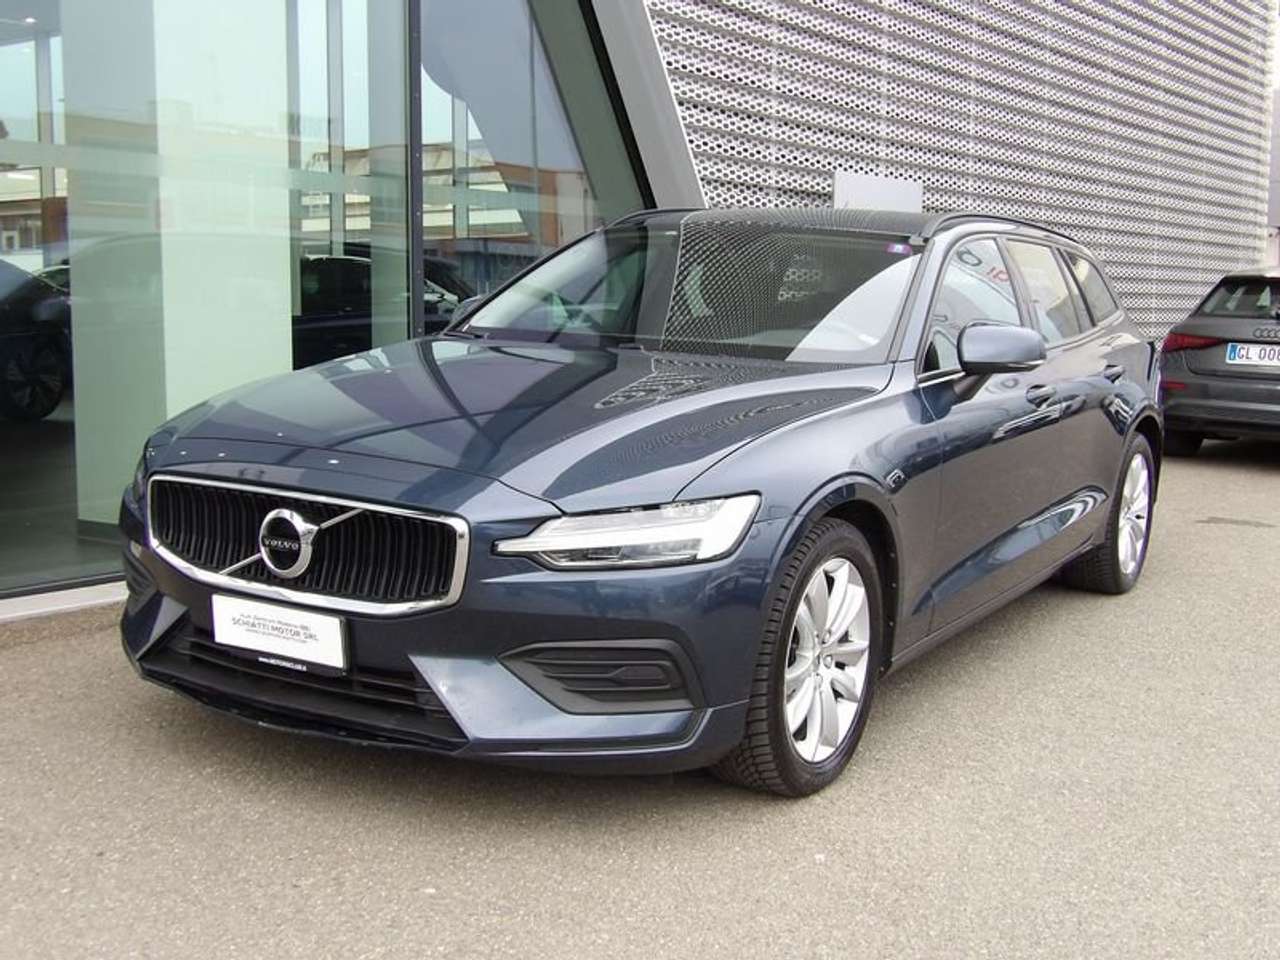 Volvo V60 D3 Geartronic Business Plus